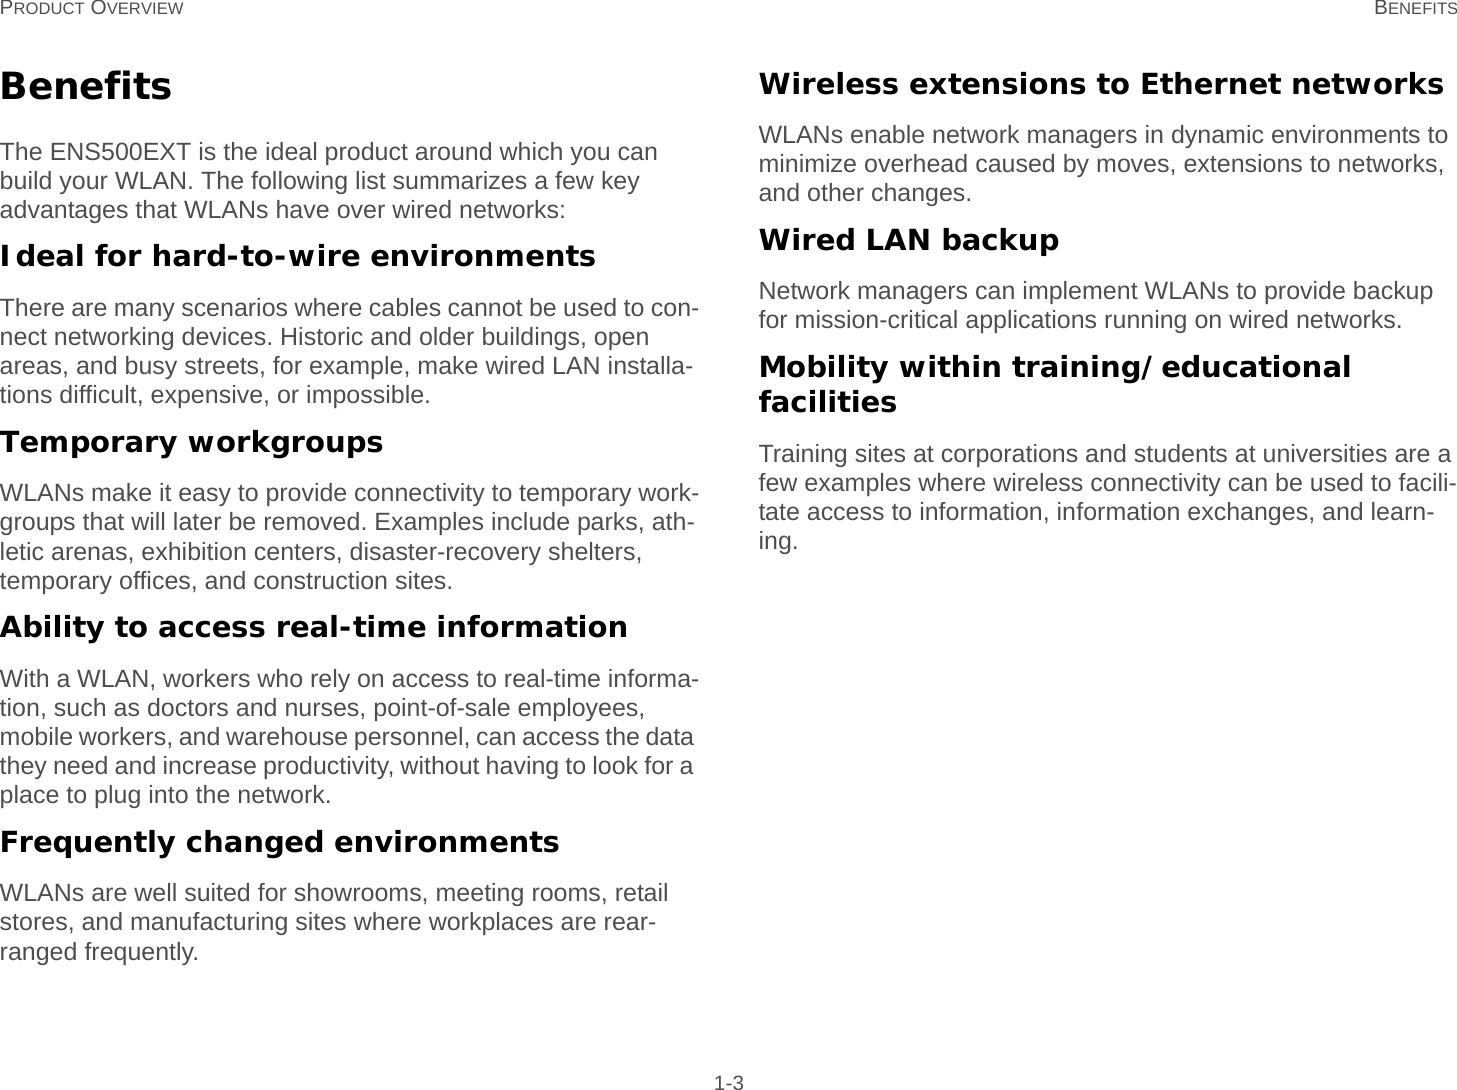 PRODUCT OVERVIEW BENEFITS 1-3BenefitsThe ENS500EXT is the ideal product around which you can build your WLAN. The following list summarizes a few key advantages that WLANs have over wired networks:Ideal for hard-to-wire environmentsThere are many scenarios where cables cannot be used to con-nect networking devices. Historic and older buildings, open areas, and busy streets, for example, make wired LAN installa-tions difficult, expensive, or impossible.Temporary workgroupsWLANs make it easy to provide connectivity to temporary work-groups that will later be removed. Examples include parks, ath-letic arenas, exhibition centers, disaster-recovery shelters, temporary offices, and construction sites.Ability to access real-time informationWith a WLAN, workers who rely on access to real-time informa-tion, such as doctors and nurses, point-of-sale employees, mobile workers, and warehouse personnel, can access the data they need and increase productivity, without having to look for a place to plug into the network.Frequently changed environmentsWLANs are well suited for showrooms, meeting rooms, retail stores, and manufacturing sites where workplaces are rear-ranged frequently.Wireless extensions to Ethernet networksWLANs enable network managers in dynamic environments to minimize overhead caused by moves, extensions to networks, and other changes.Wired LAN backupNetwork managers can implement WLANs to provide backup for mission-critical applications running on wired networks.Mobility within training/educational facilitiesTraining sites at corporations and students at universities are a few examples where wireless connectivity can be used to facili-tate access to information, information exchanges, and learn-ing.